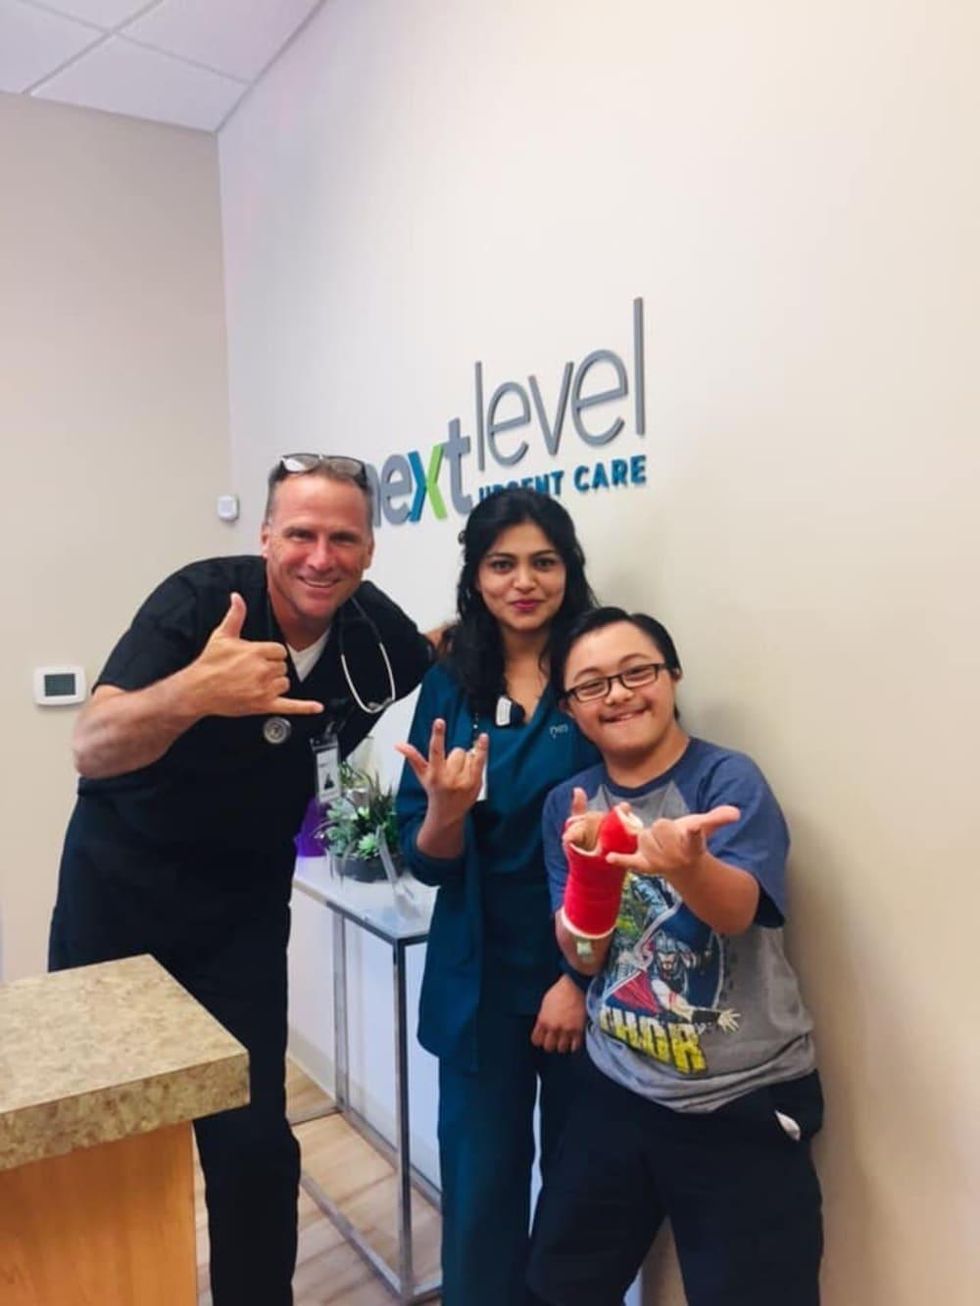 Next Level Urgent Care employees and patient